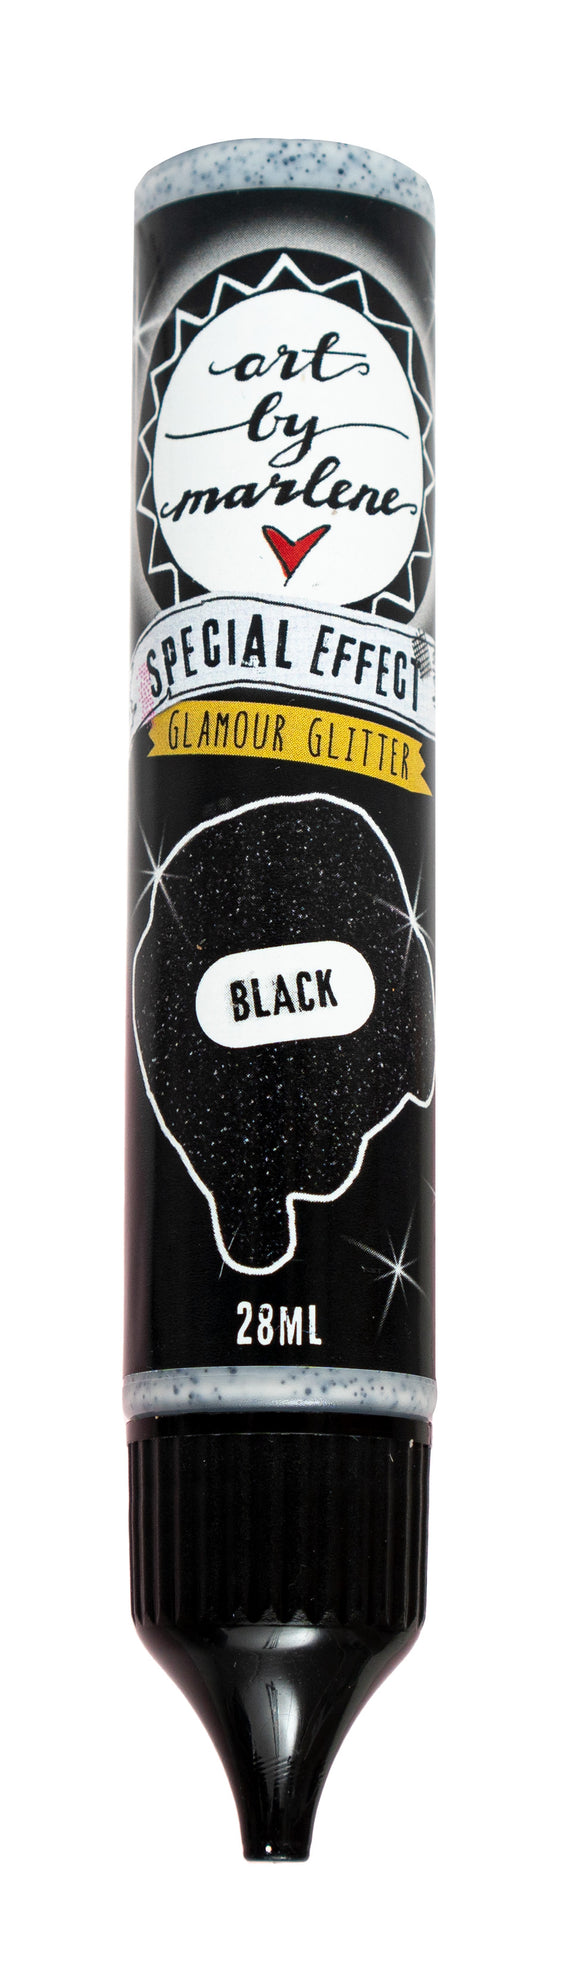 Special Effect Glamour Glitter - Black : (ABM) ACP37